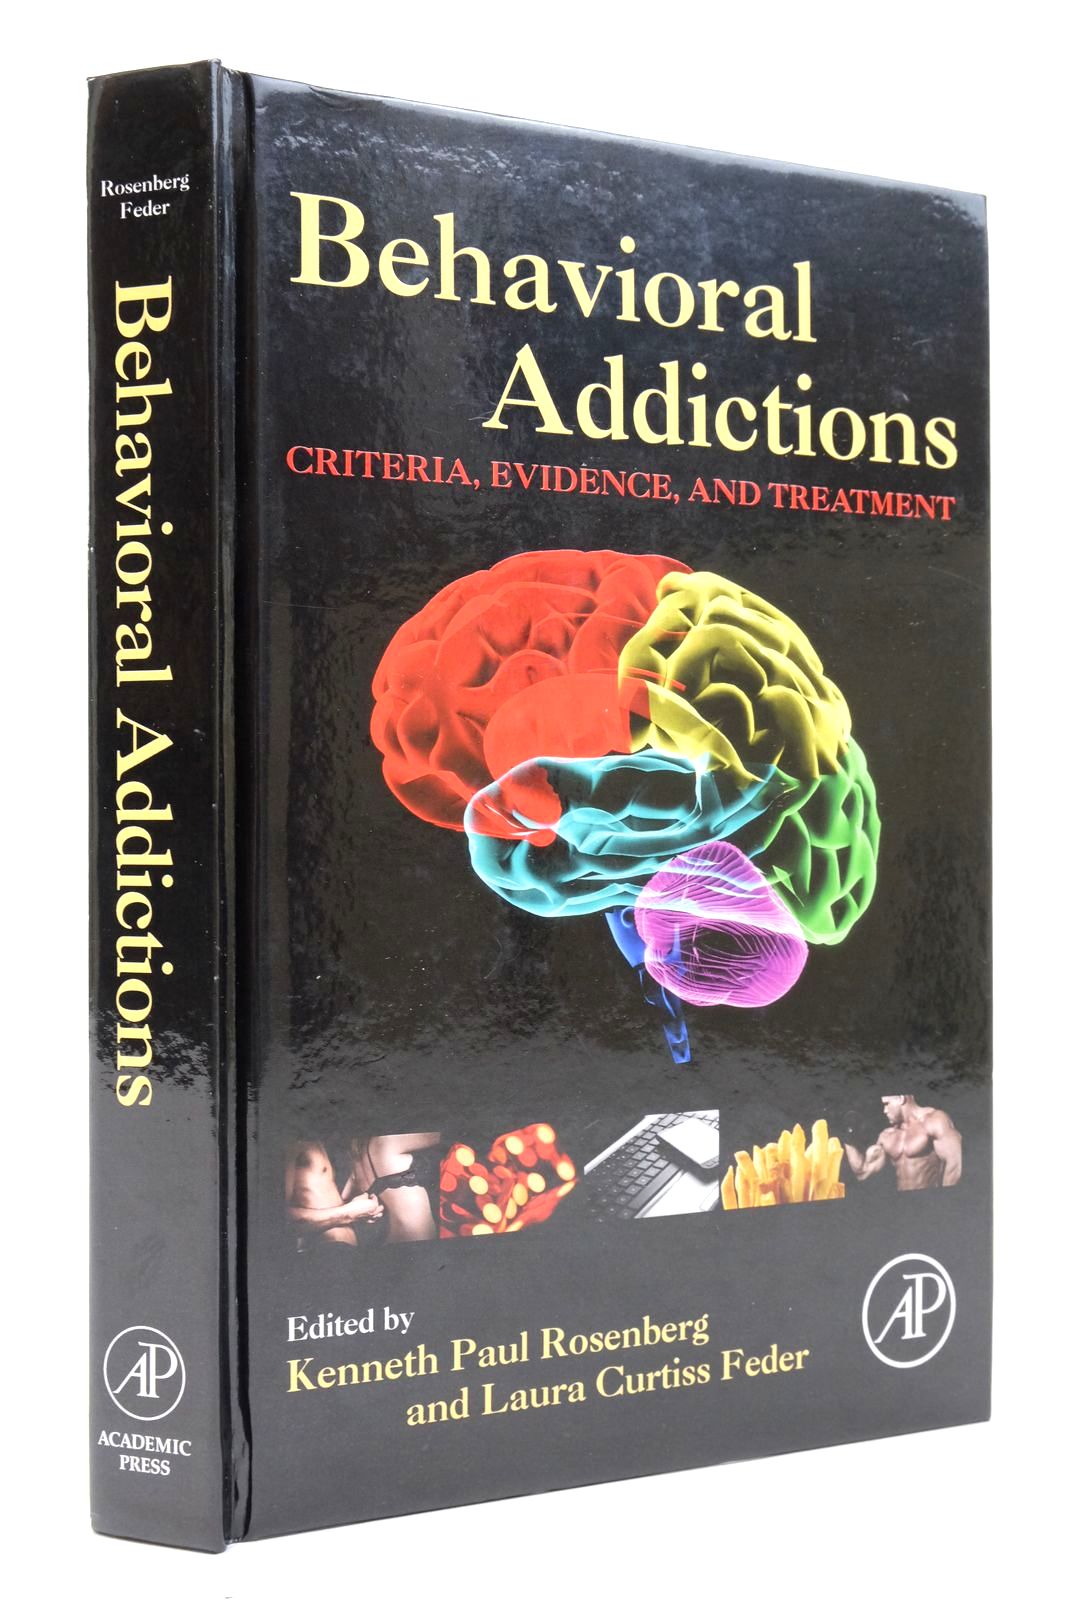 Photo of BEHAVIORAL ADDICTIONS: CRITERIA, EVIDENCE AND TREATMENT written by Rosenberg, Kenneth Paul
Feder, Laura Curtiss published by Academic Press (STOCK CODE: 2137271)  for sale by Stella & Rose's Books